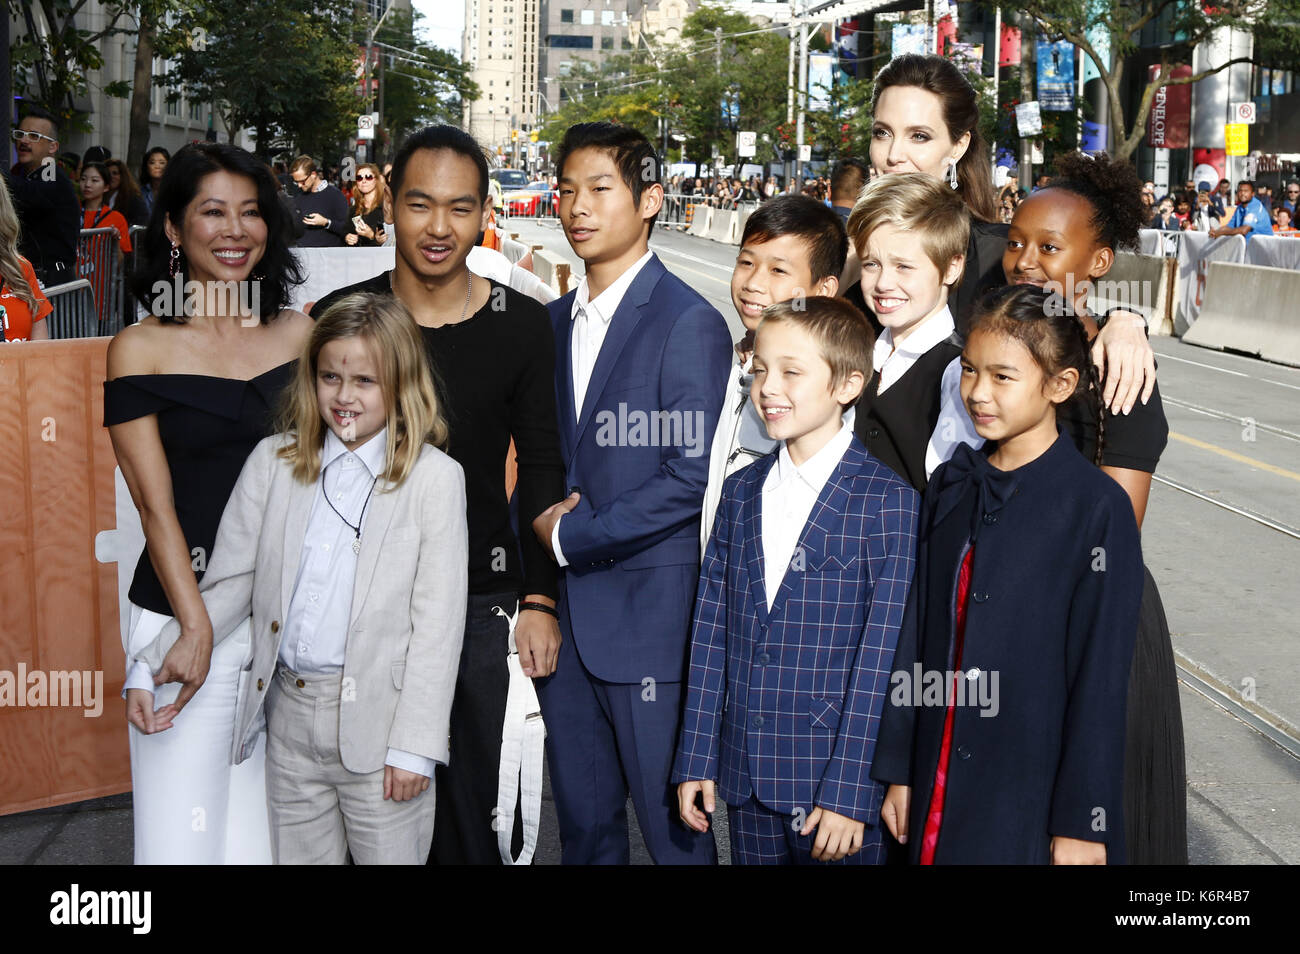 Toronto, Kanada. 11th Sep, 2017. Loung Ung, Vivienne Marcheline Jolie-Pitt, Maddox Jolie-Pitt, Pax Thien Jolie-Pitt, Kimhak Mun, Knox Leon Jolie-Pitt, Shiloh Jolie-Pitt, Angelina Jolie, Zahara Jolie-Pitt and Sareum Srey Moch attending the 'First They Killed My Father: A Daughter of Cambodia Remembers' premiere during the 42nd Toronto International Film Festival at Princess of Wales Theatre on September 11, 2017 in Toronto, Canada | Verwendung weltweit/picture alliance Credit: dpa/Alamy Live News Stock Photo